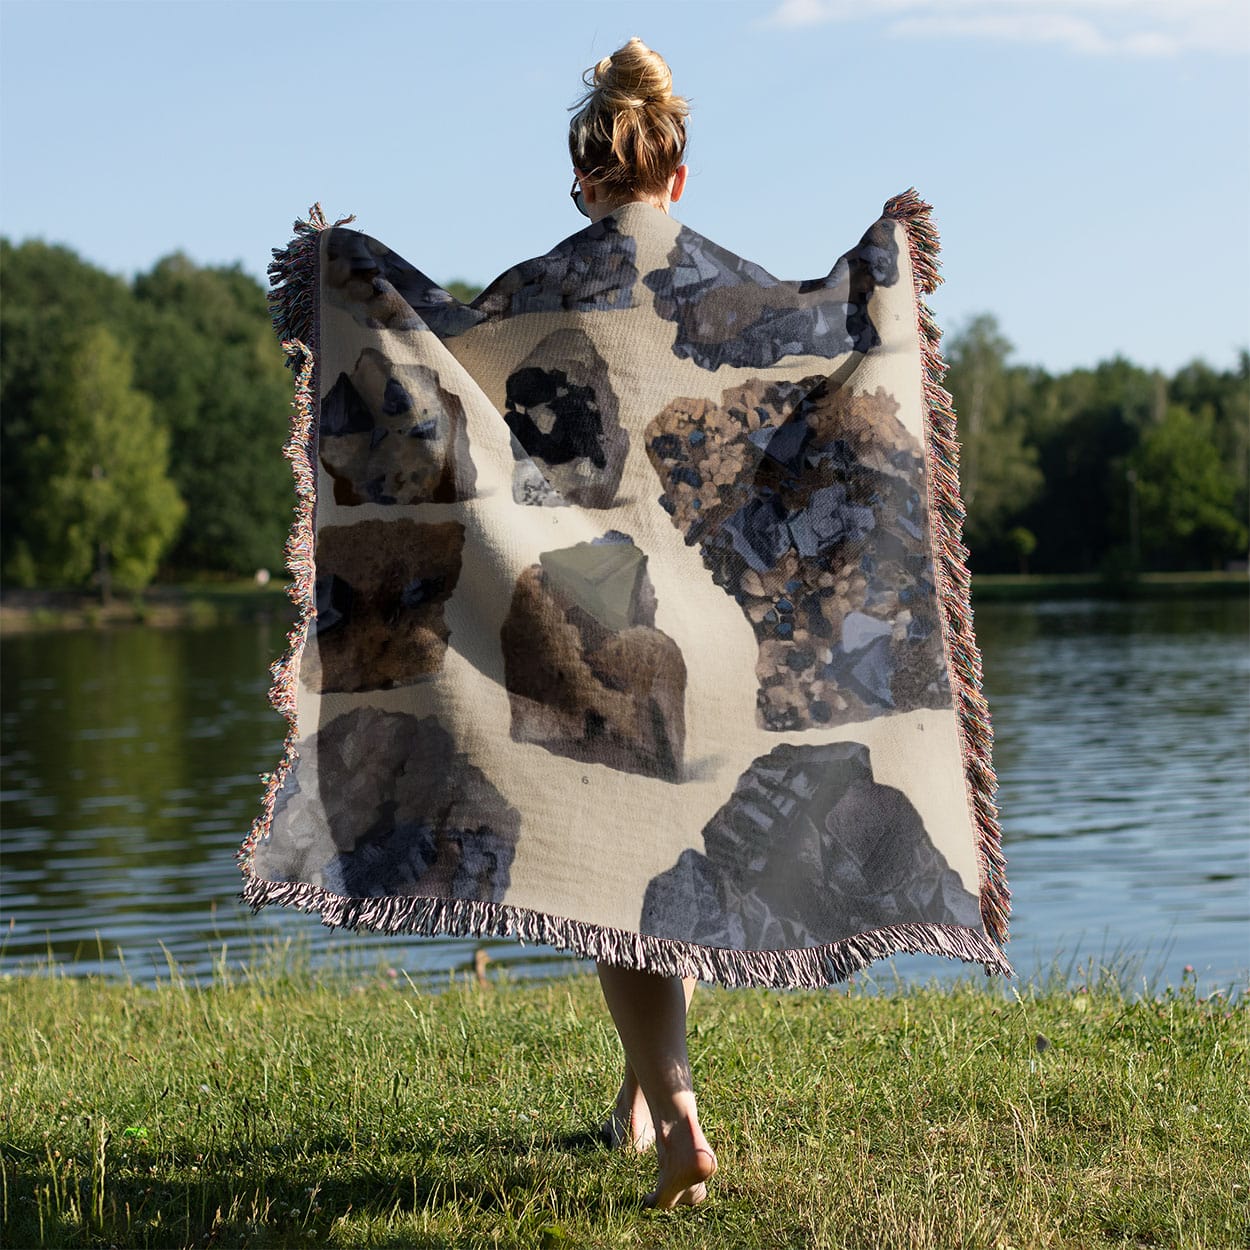 Vintage Rocks and Crystals Woven Blanket Held on a Woman's Back Outside